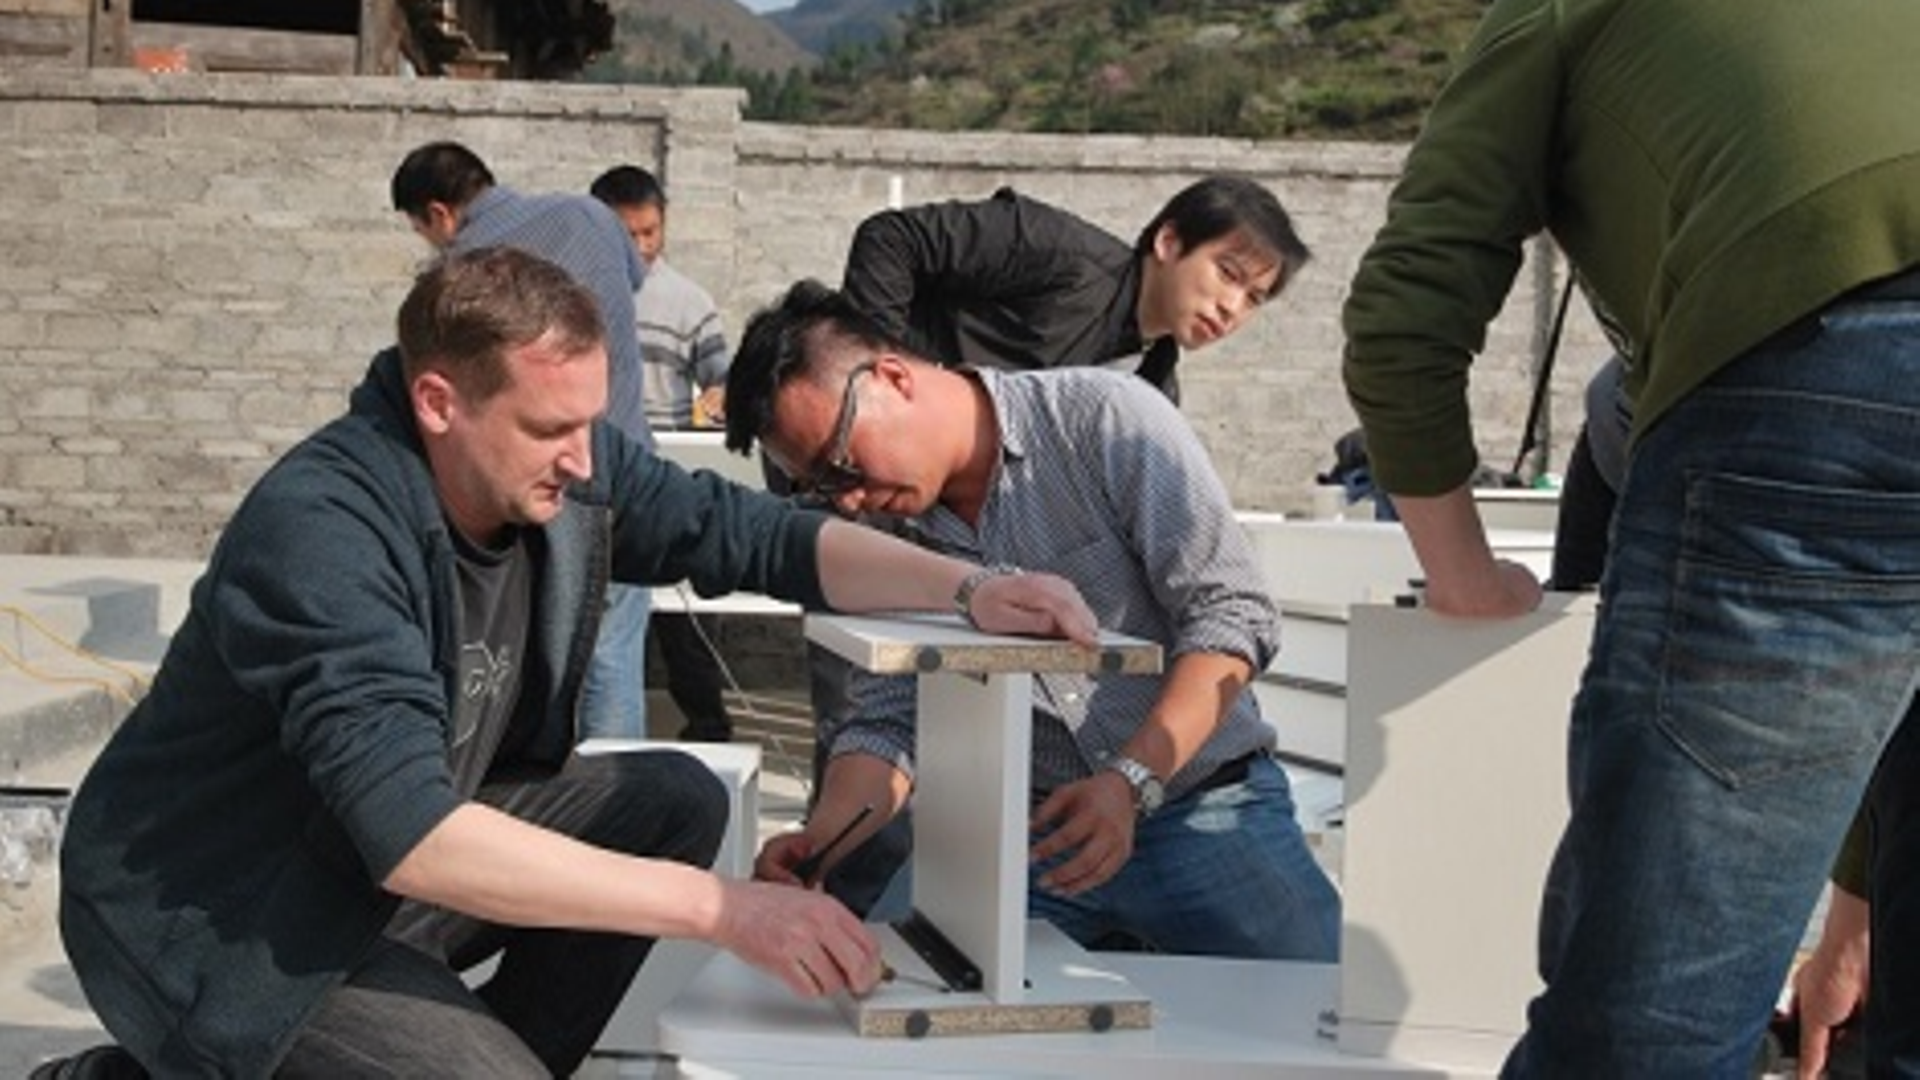 Schneider (left) and his team set up the donated furniture